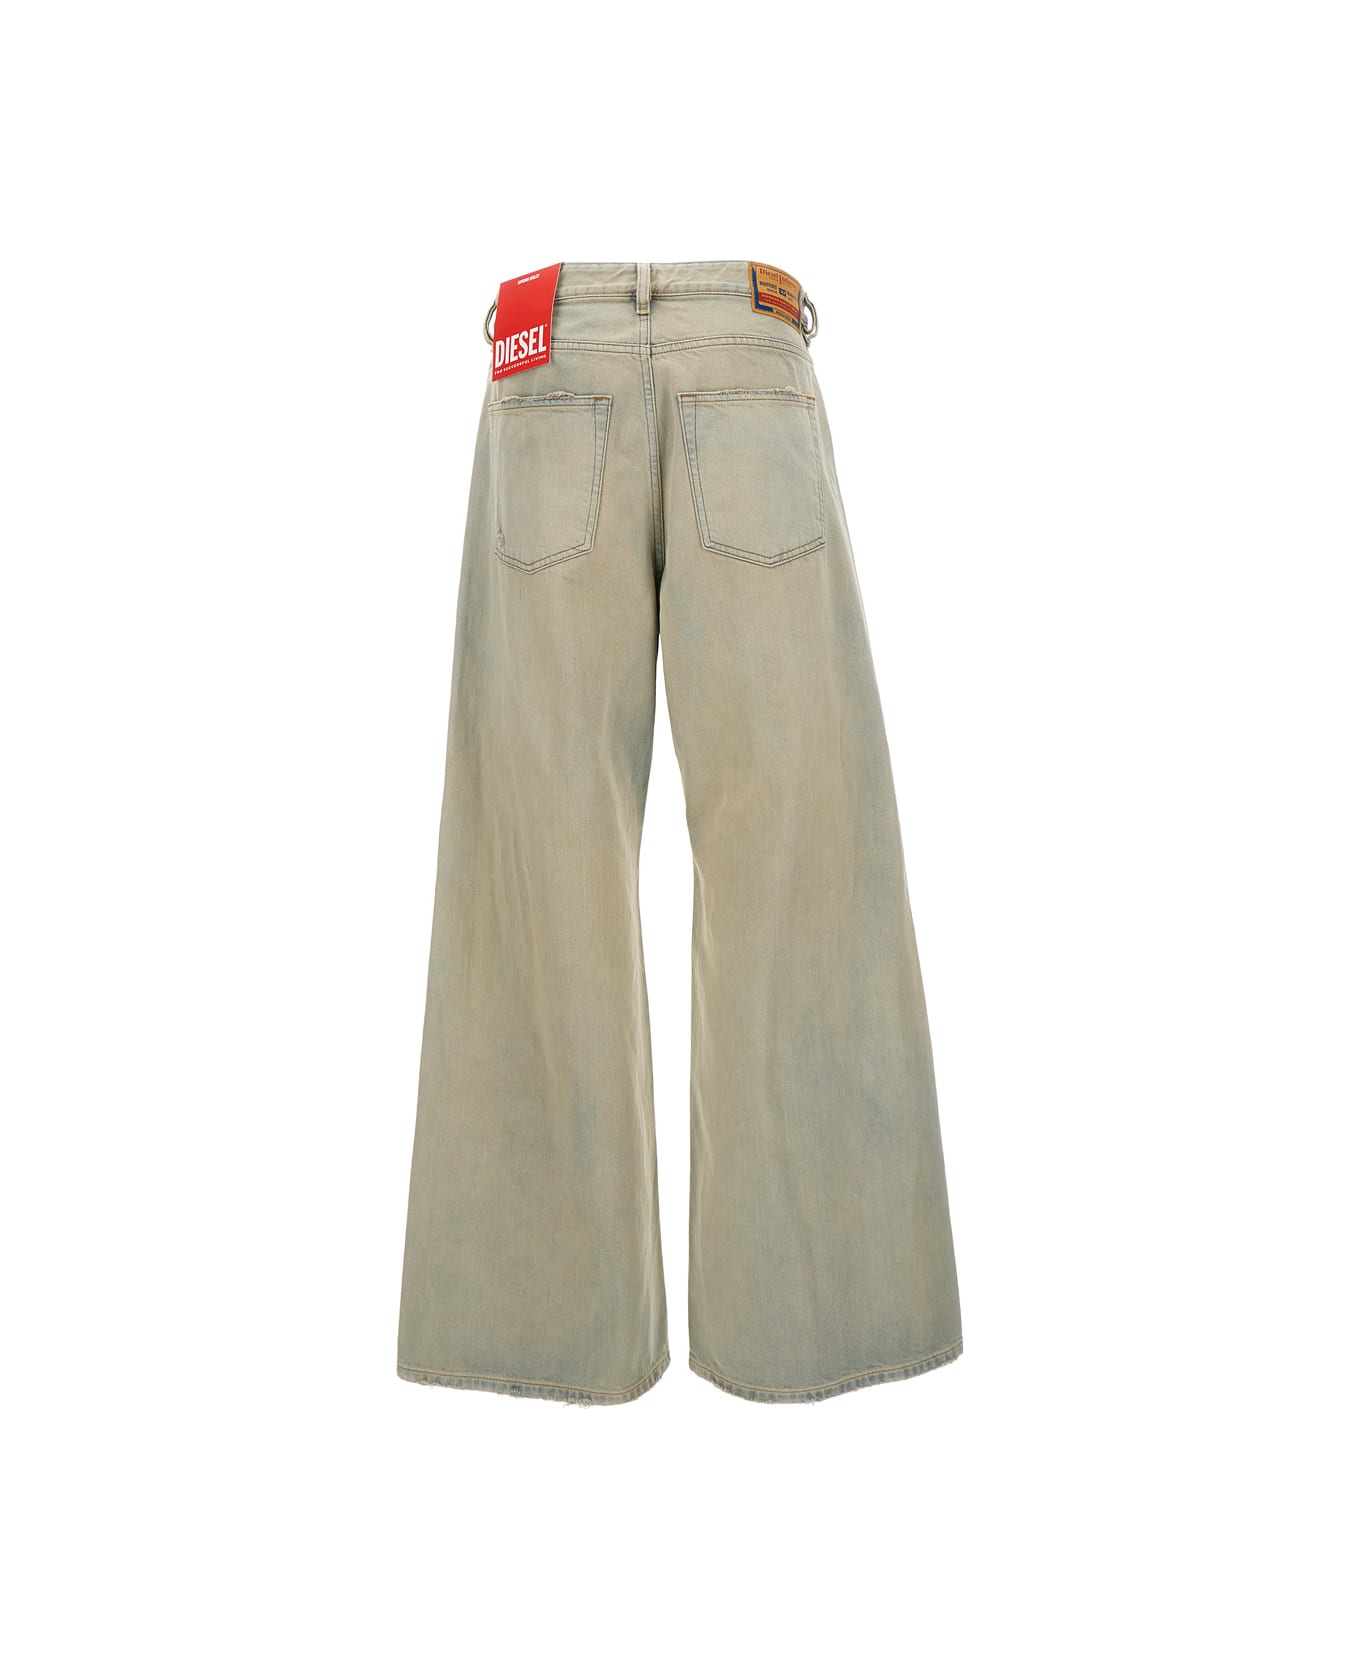 Diesel 1996 D-sire Low-rise Wide-leg Washed Jeans ボトムス